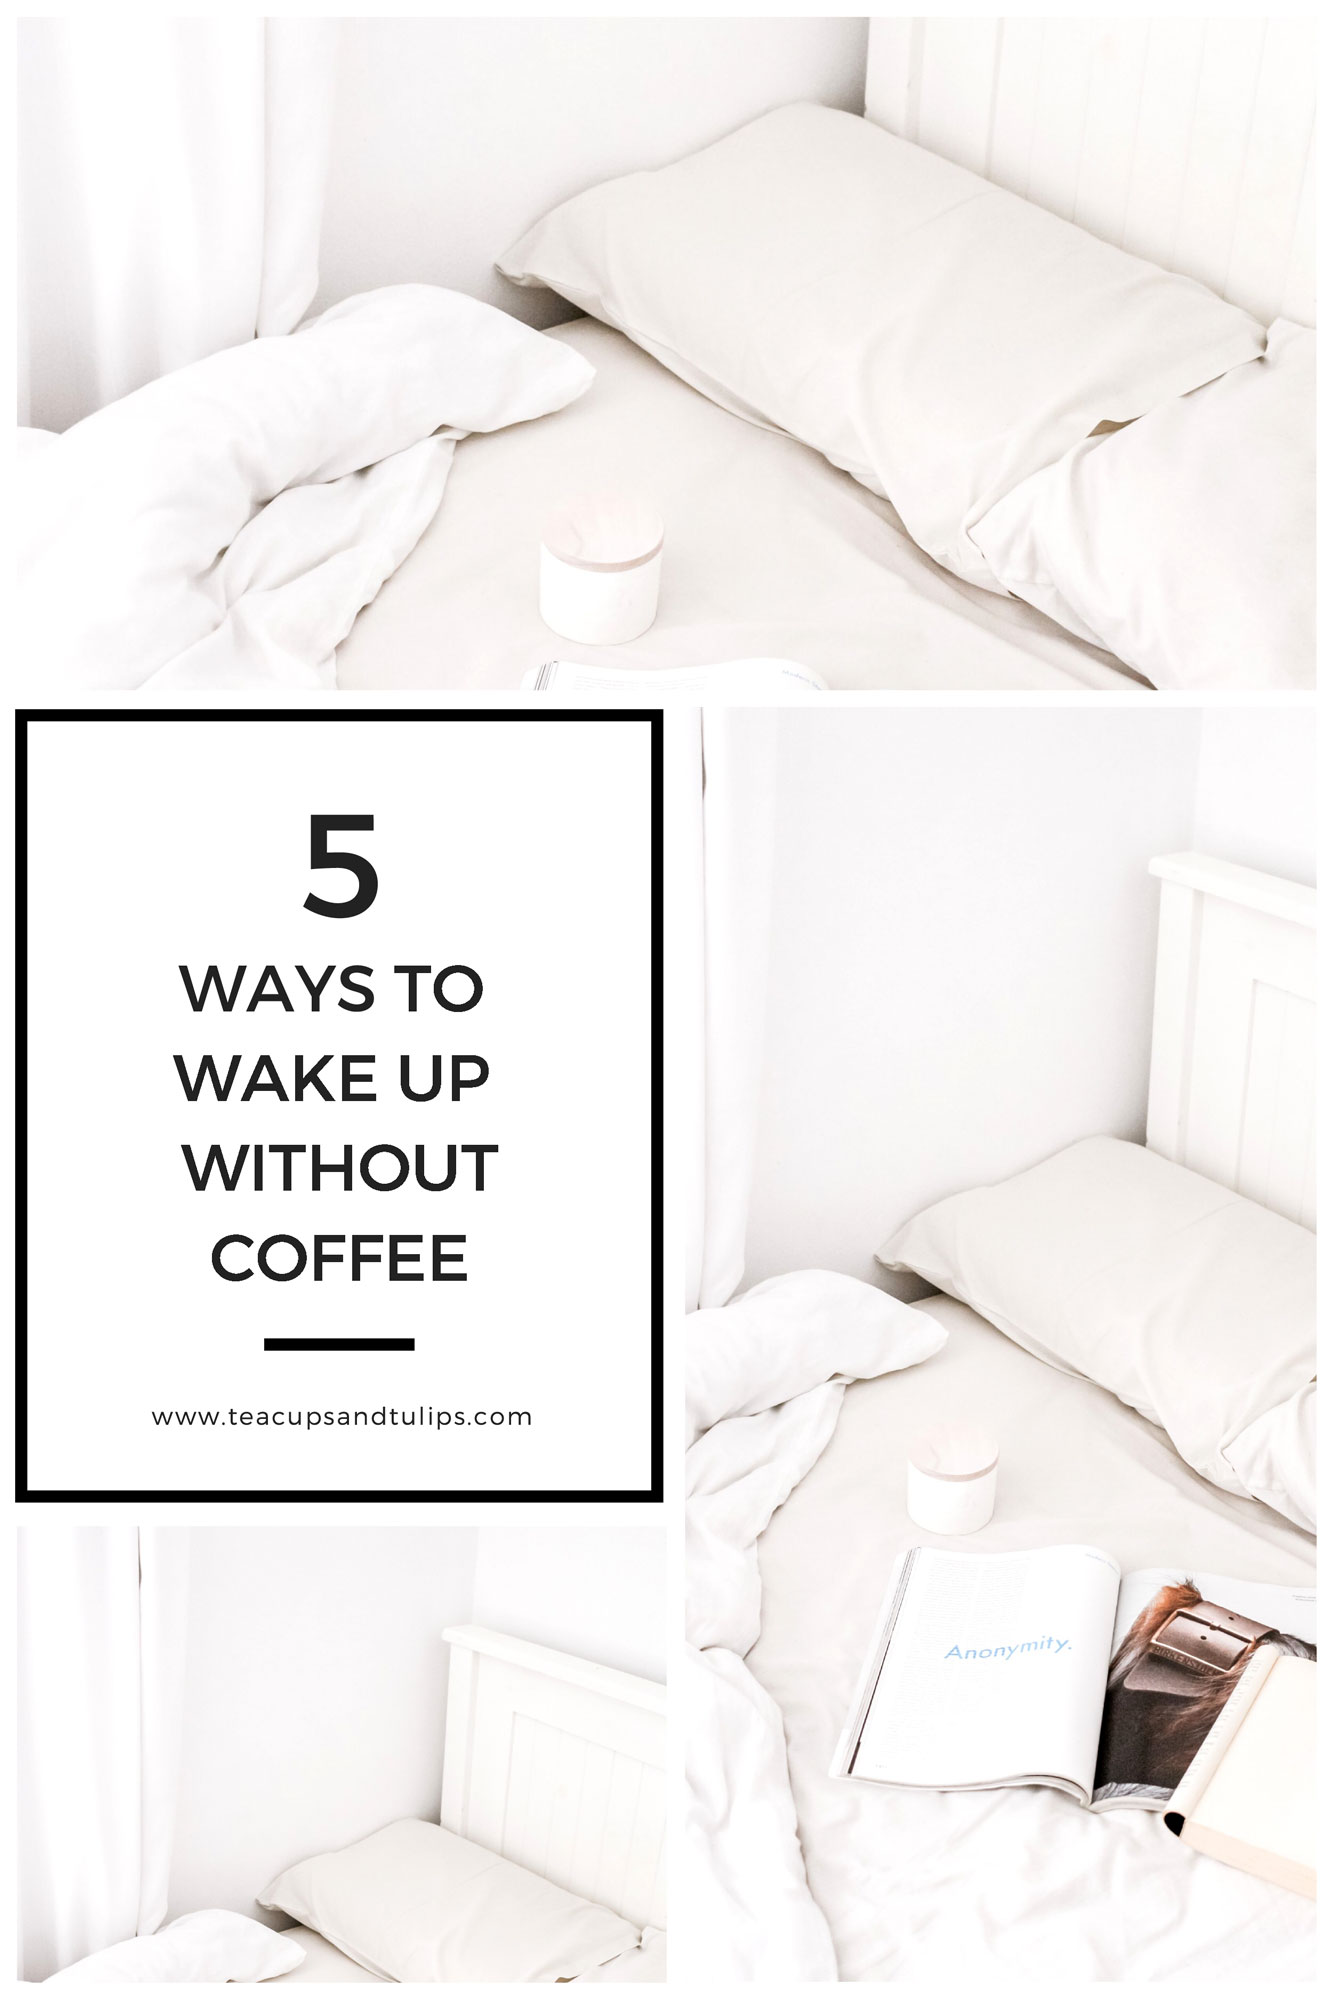 5 ways to wake up without coffee